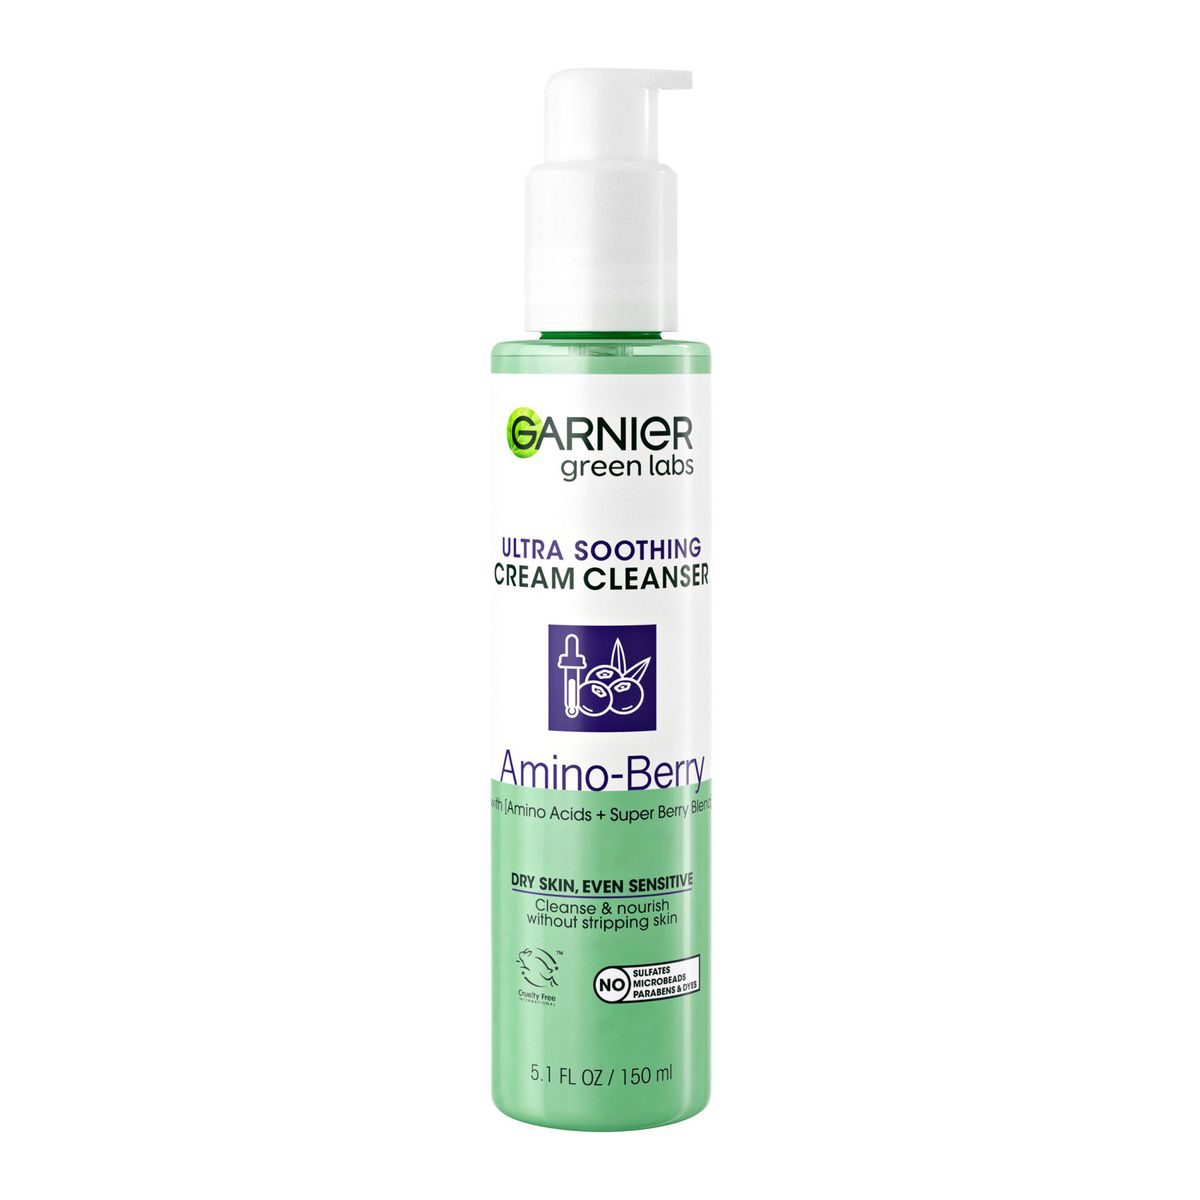 Garnier Amino-Berry Ultra Soothing Cream Cleanser-Health-Print-Dec-2021-Your-Skin-On-Winter-Products